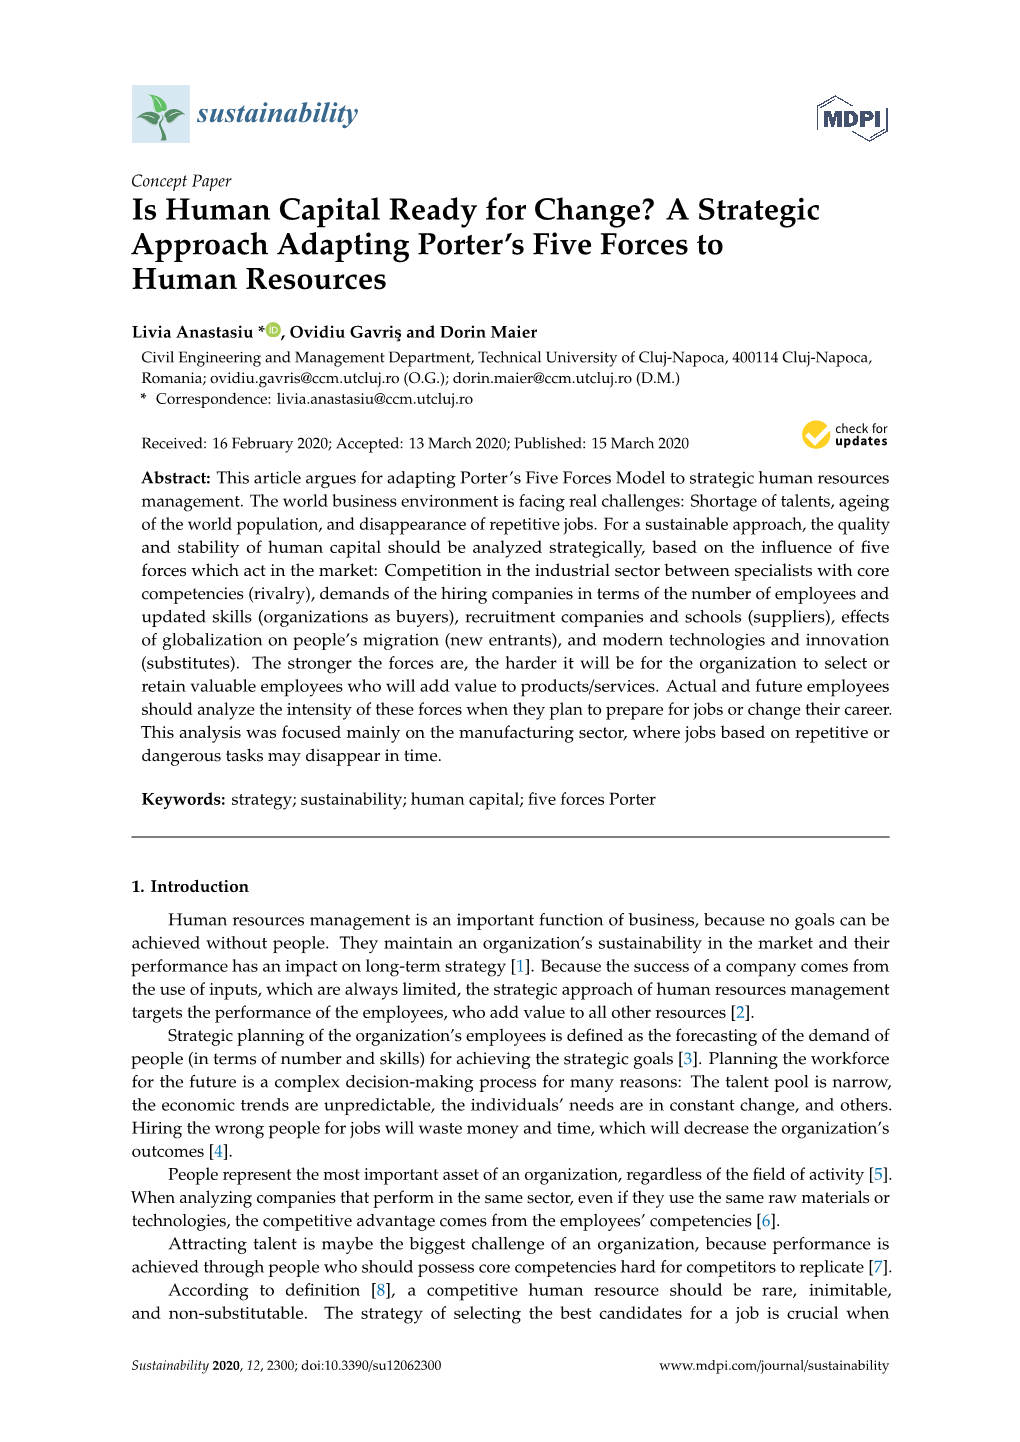 A Strategic Approach Adapting Porter's Five Forces to Human